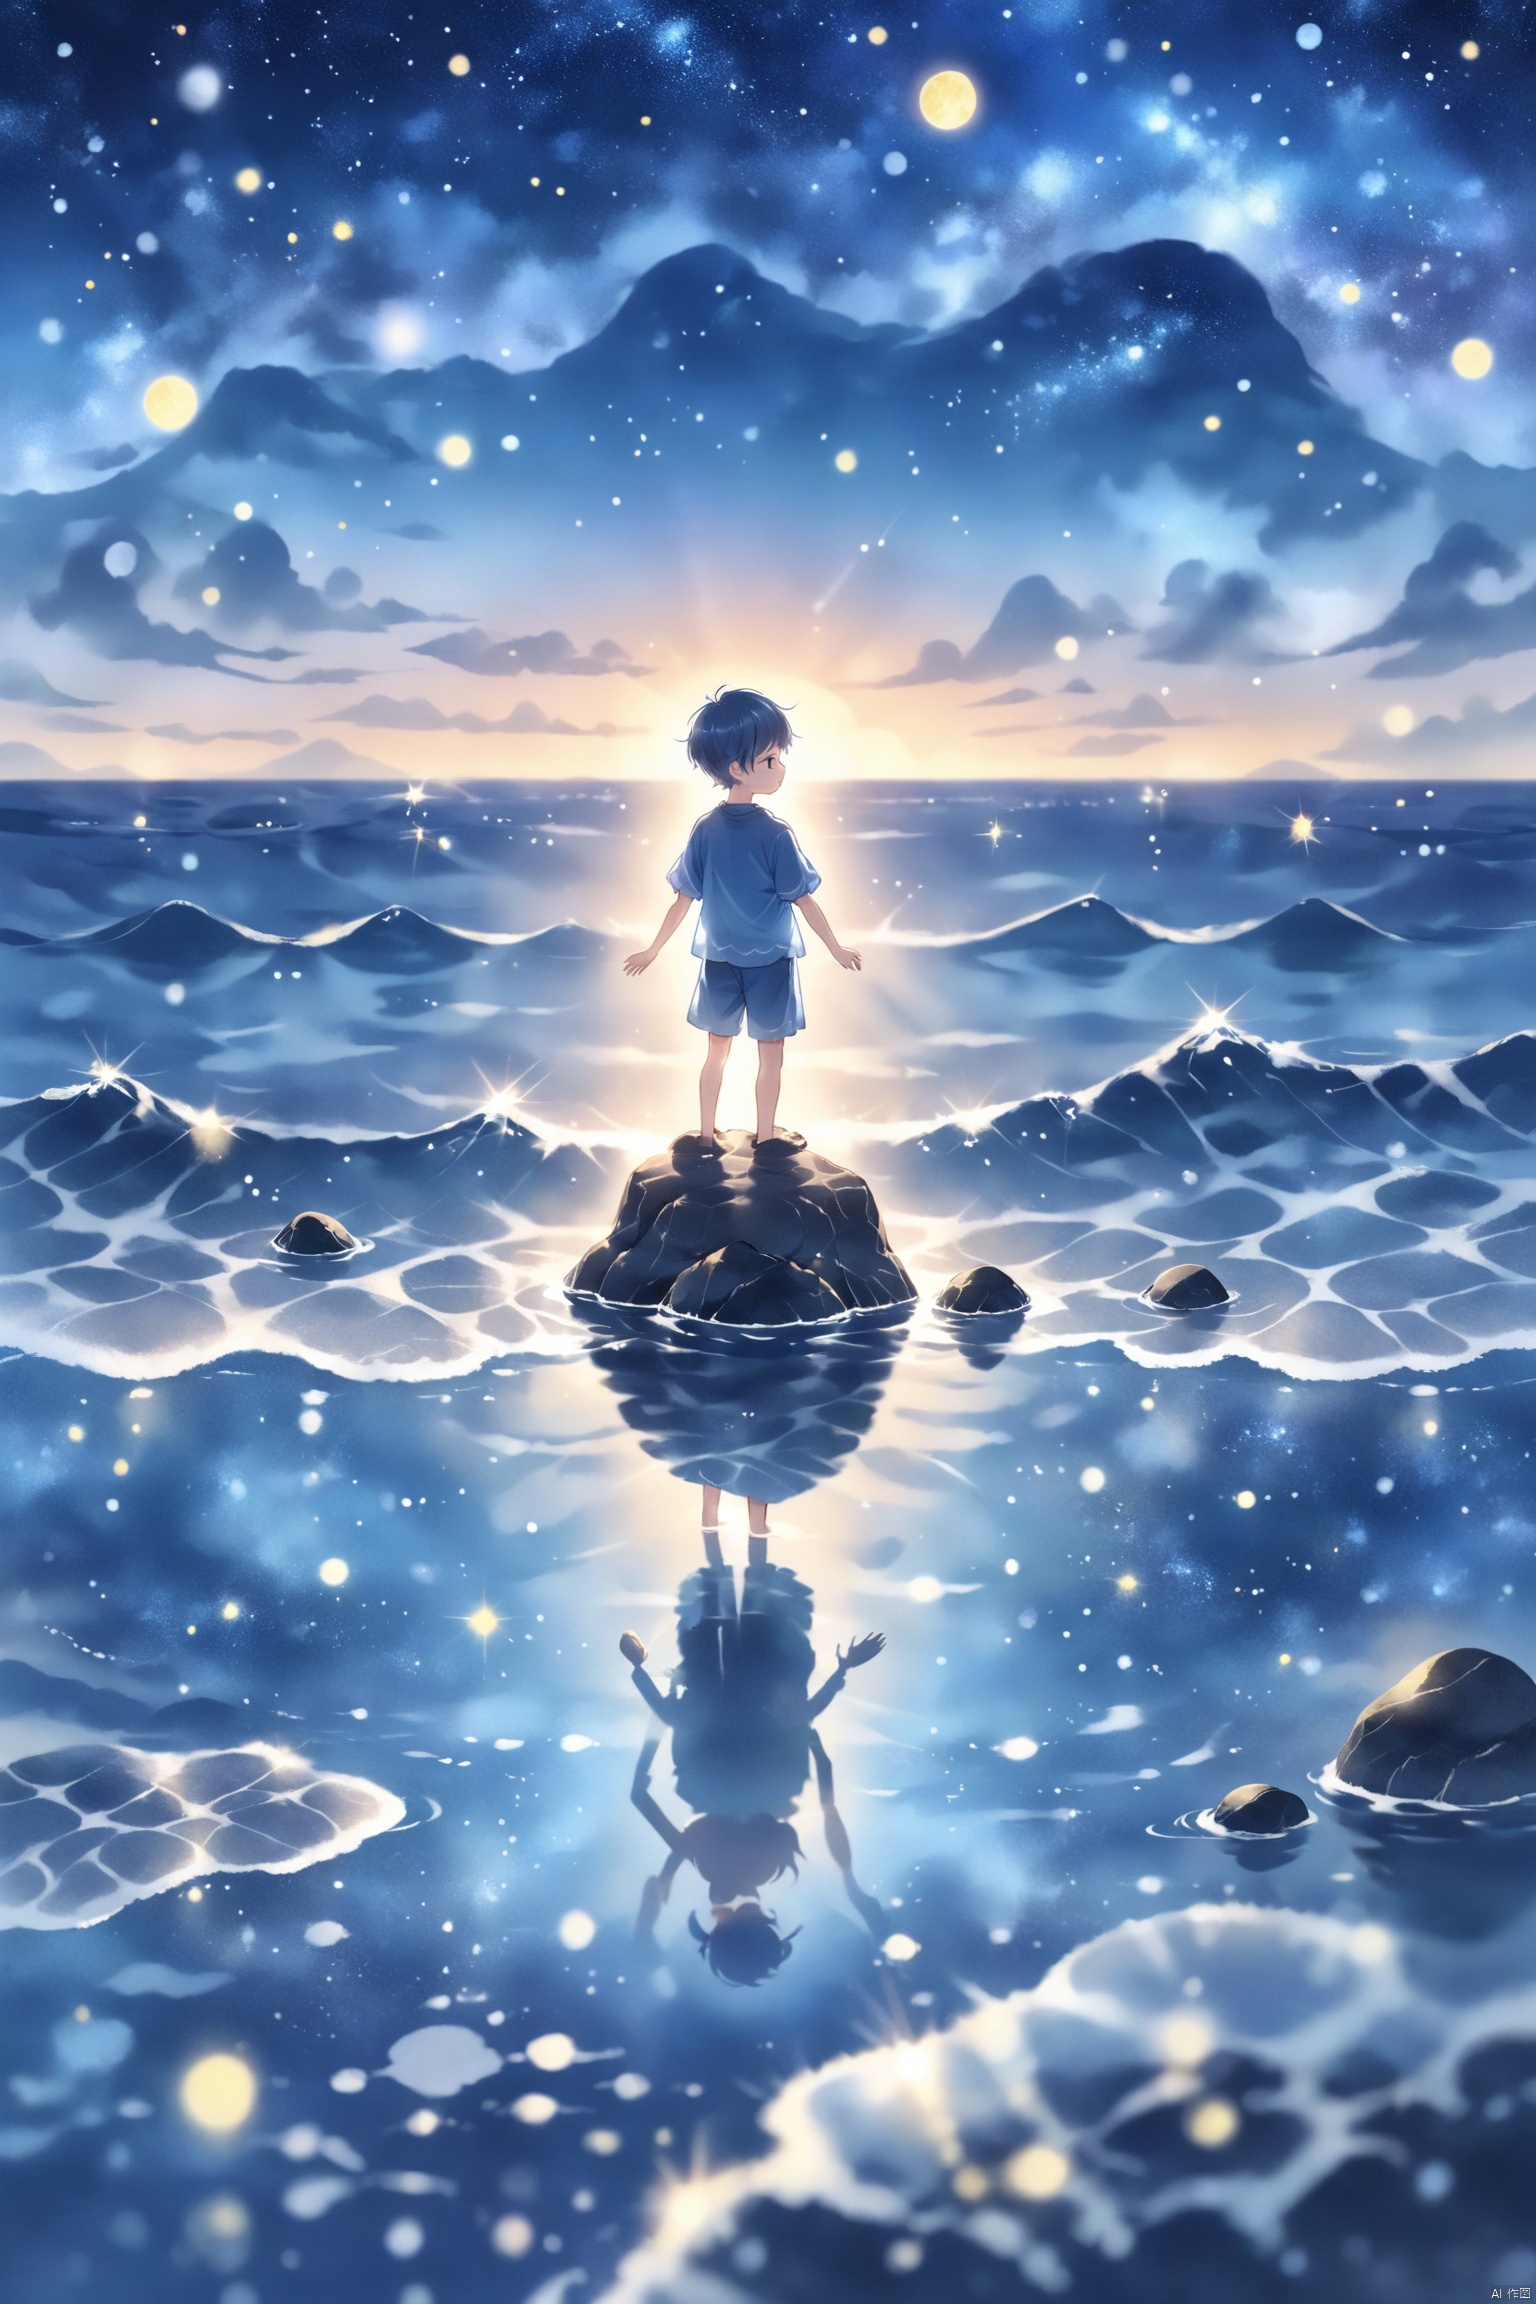 Photography Award Winning Entry,There is a rock in the middle of the sea,a boy stands on the rock in the middle of the sea and reaches out to pick the stars in the sky. ocean reflection,dawn blue,blue waves,happiness,dream fairy tale,fantasy,bright background,reflection,colourful,starry sky,8K,